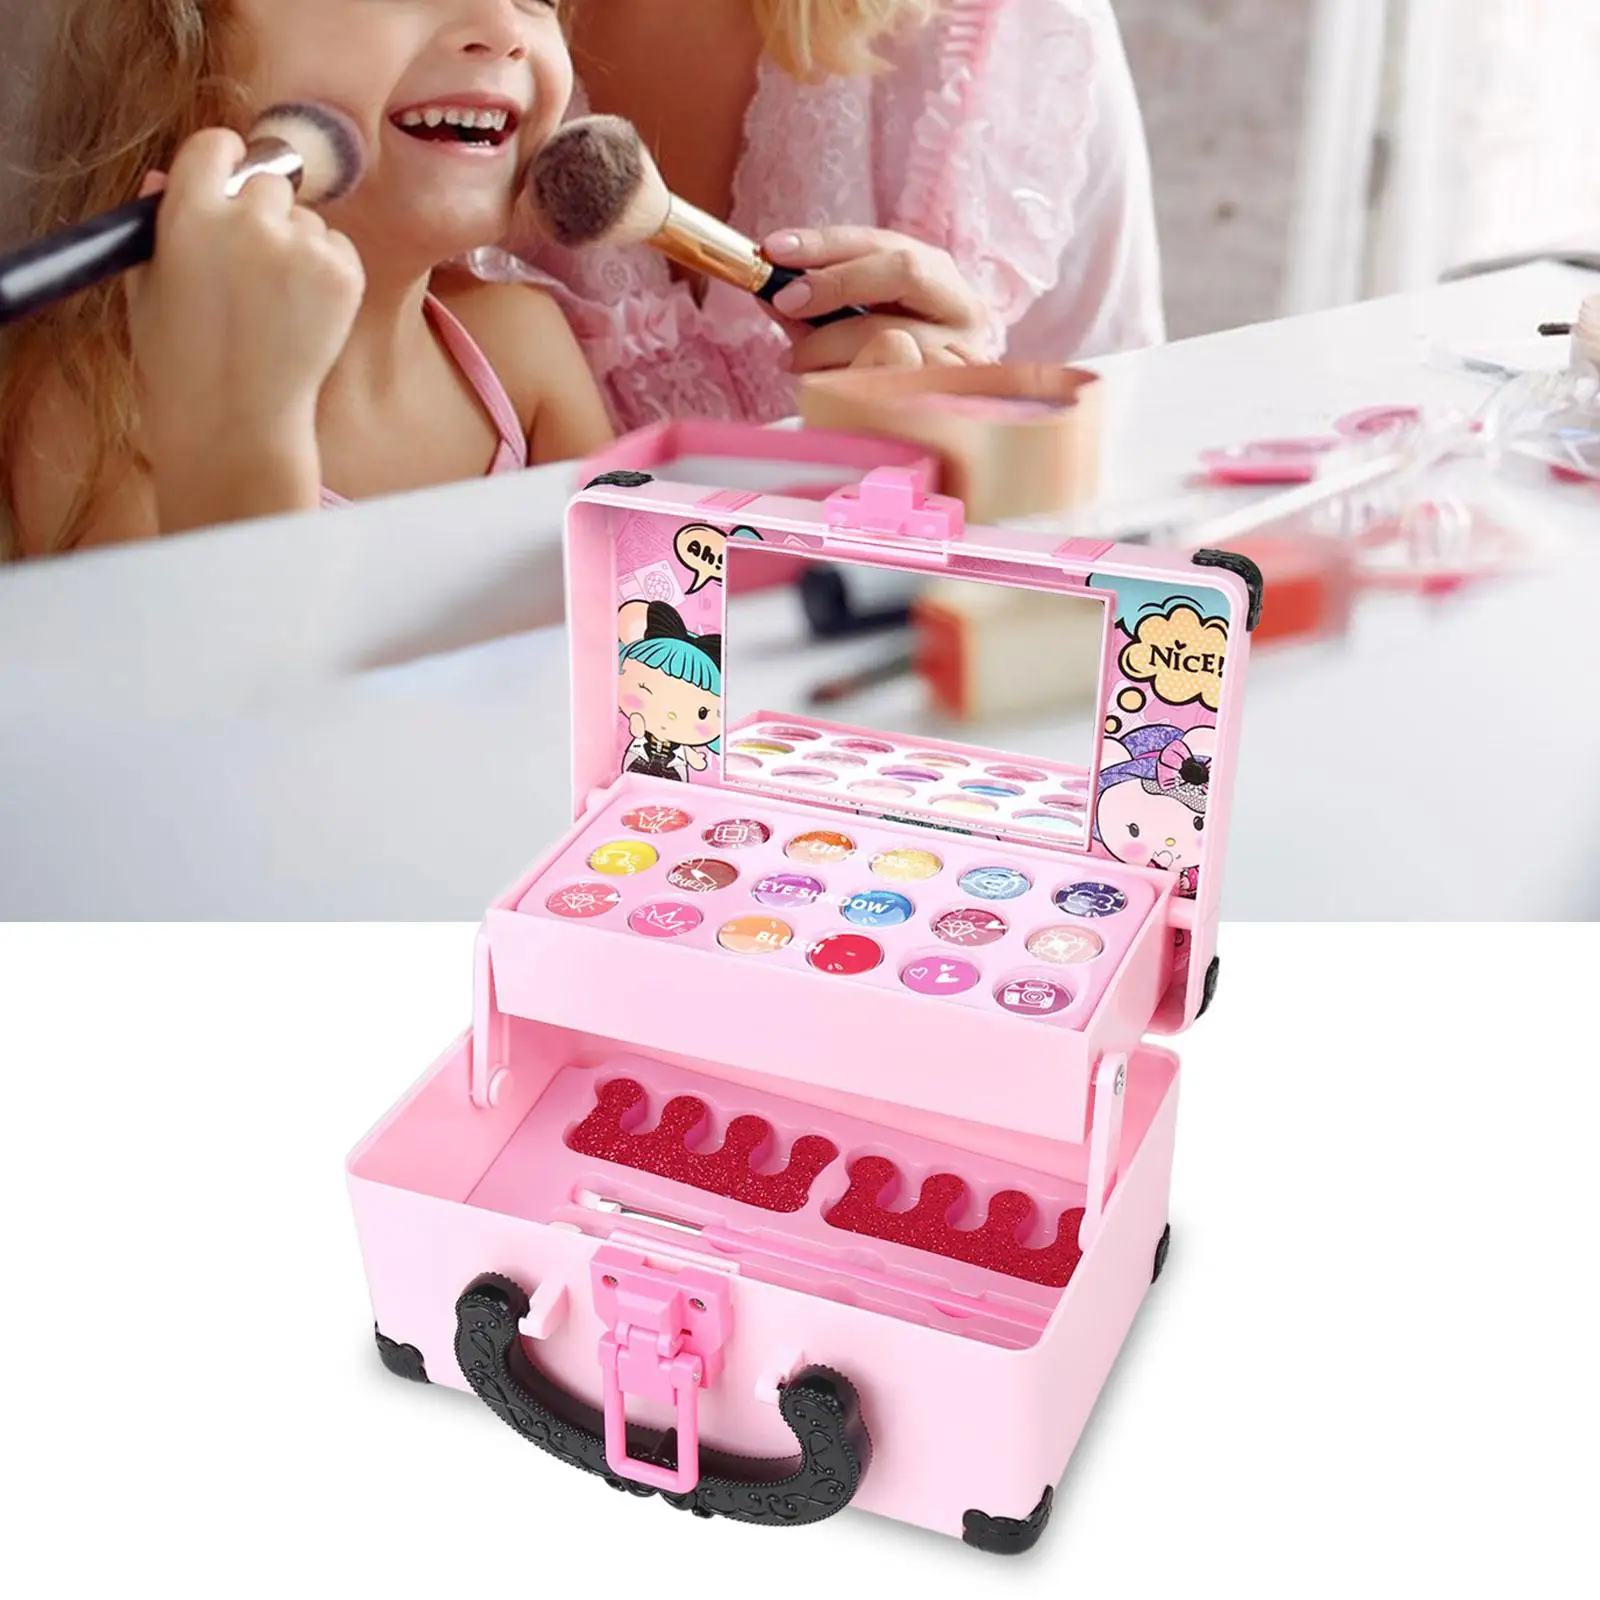 Pretend Play Makeup Toy Set Portable Makeup Vanity Toy Cosmetics Makeup Toy Set for Girls Kids Toddlers Children Birthday Gifts